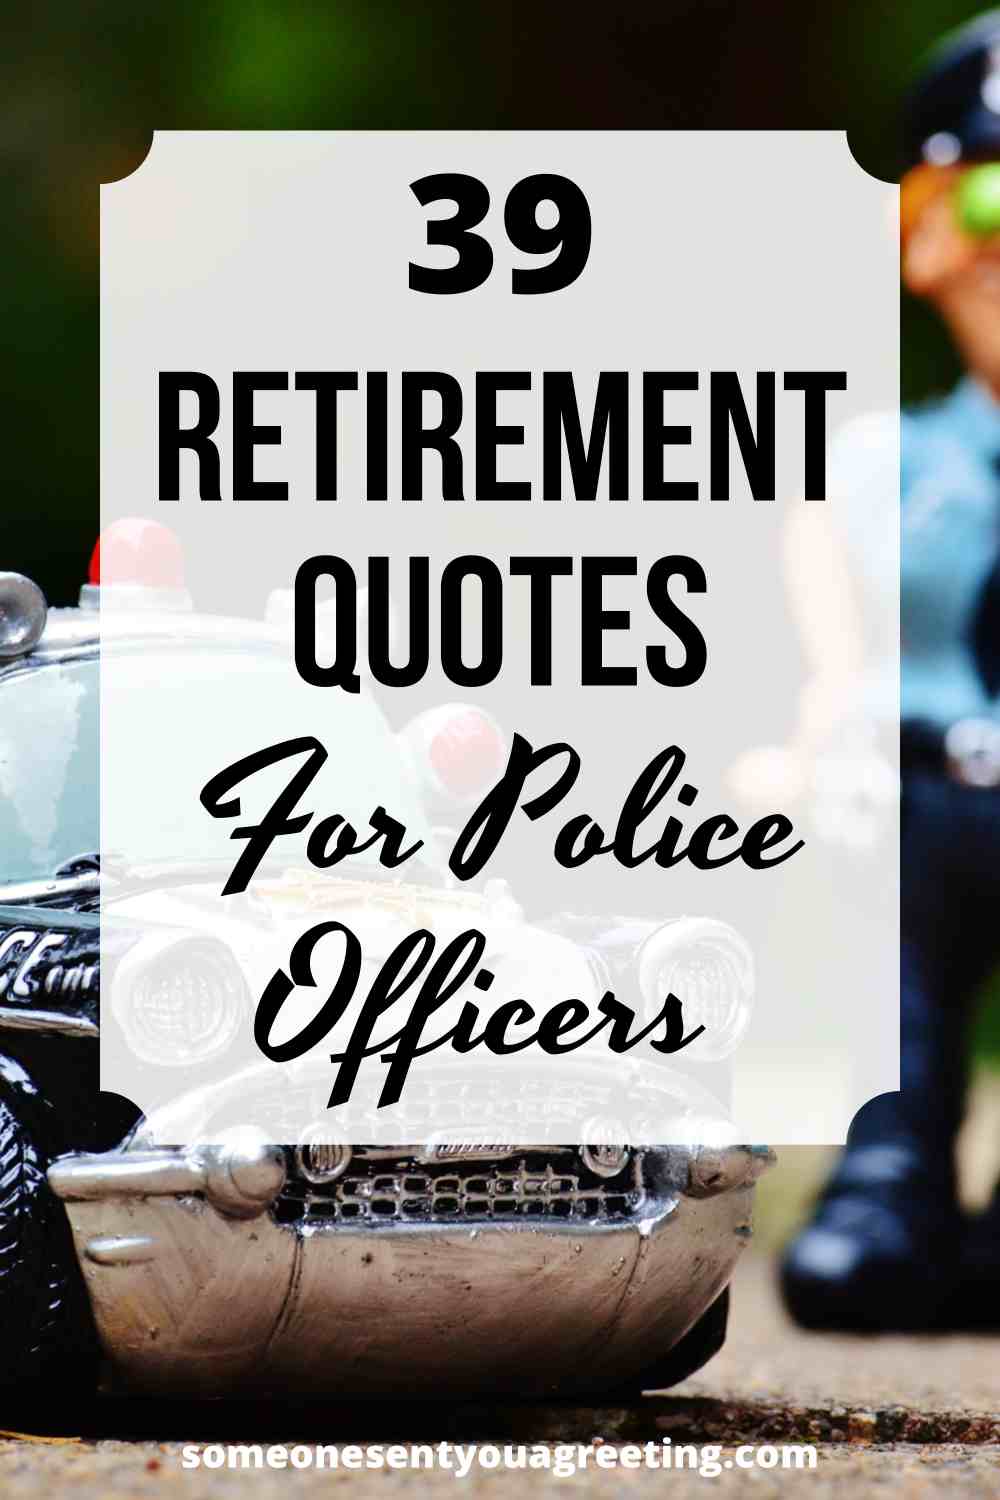 Retirement quotes for police officers